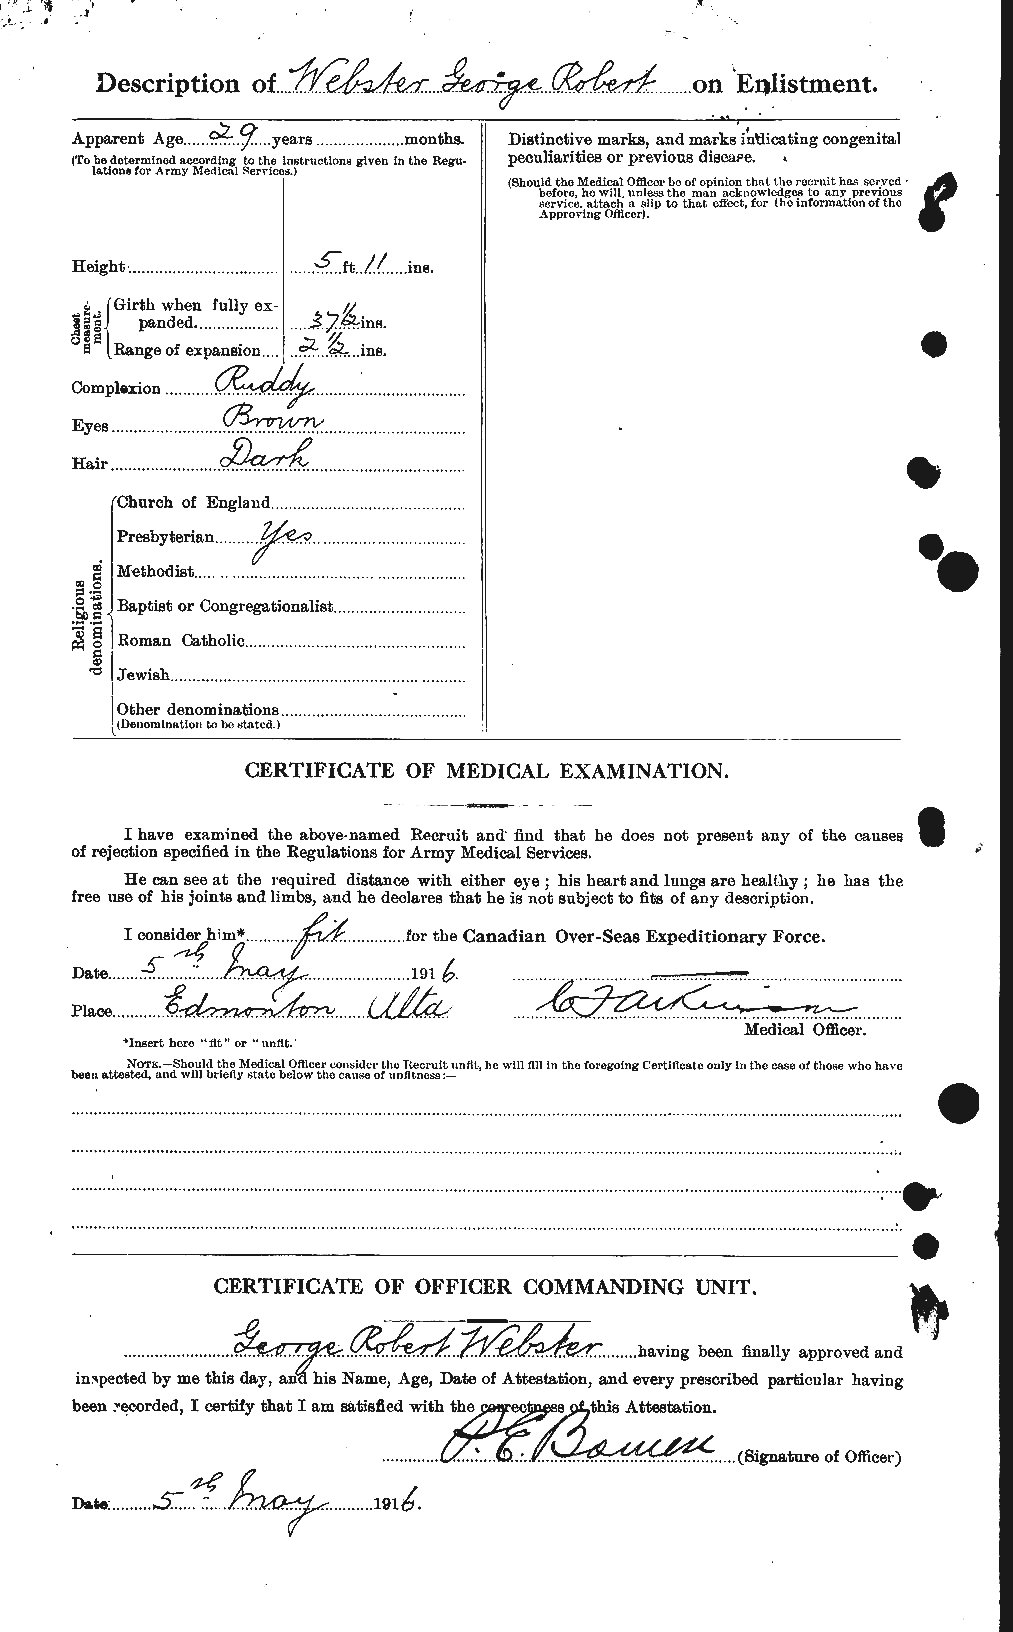 Personnel Records of the First World War - CEF 670393b